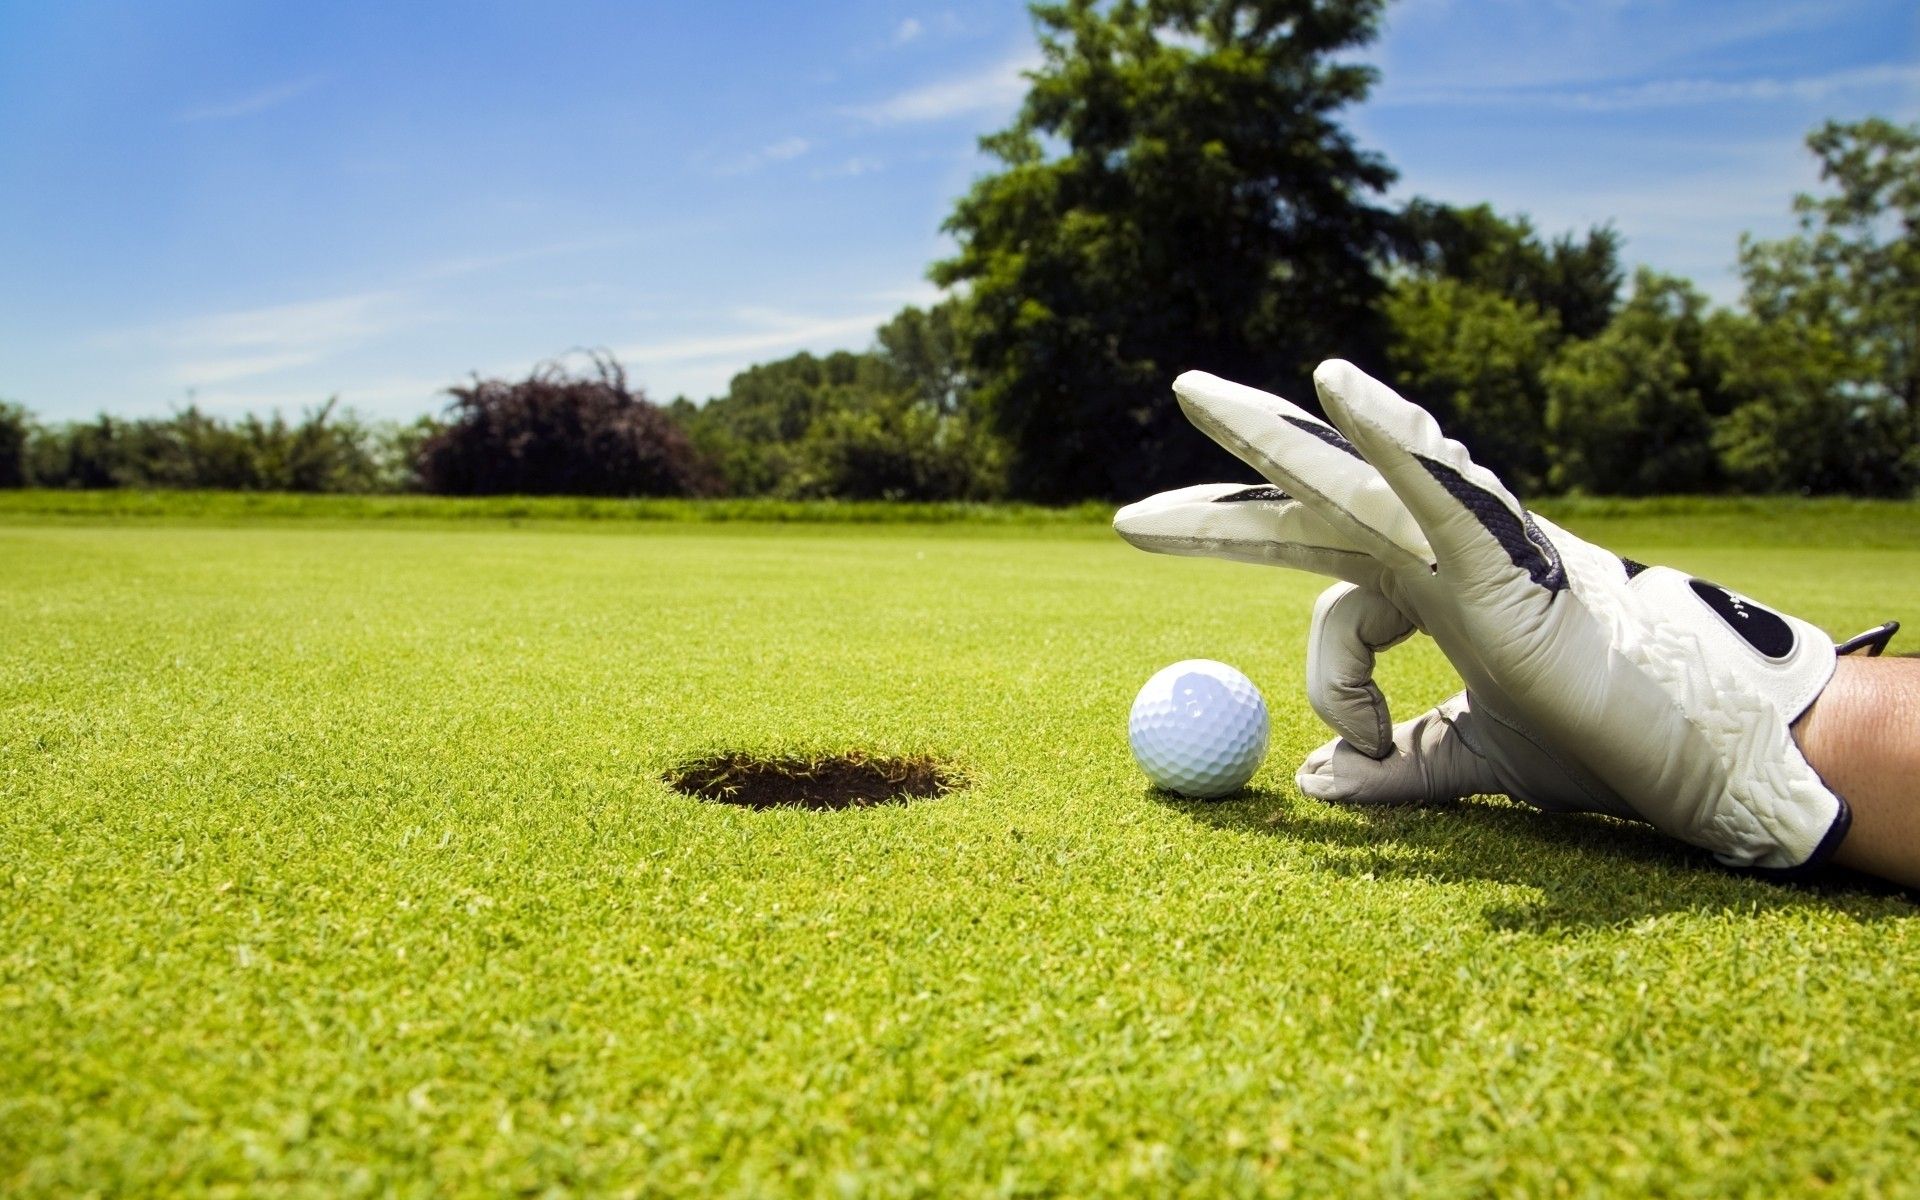 Golf desktop wallpapers in best quality - PGA tours and Golf fields